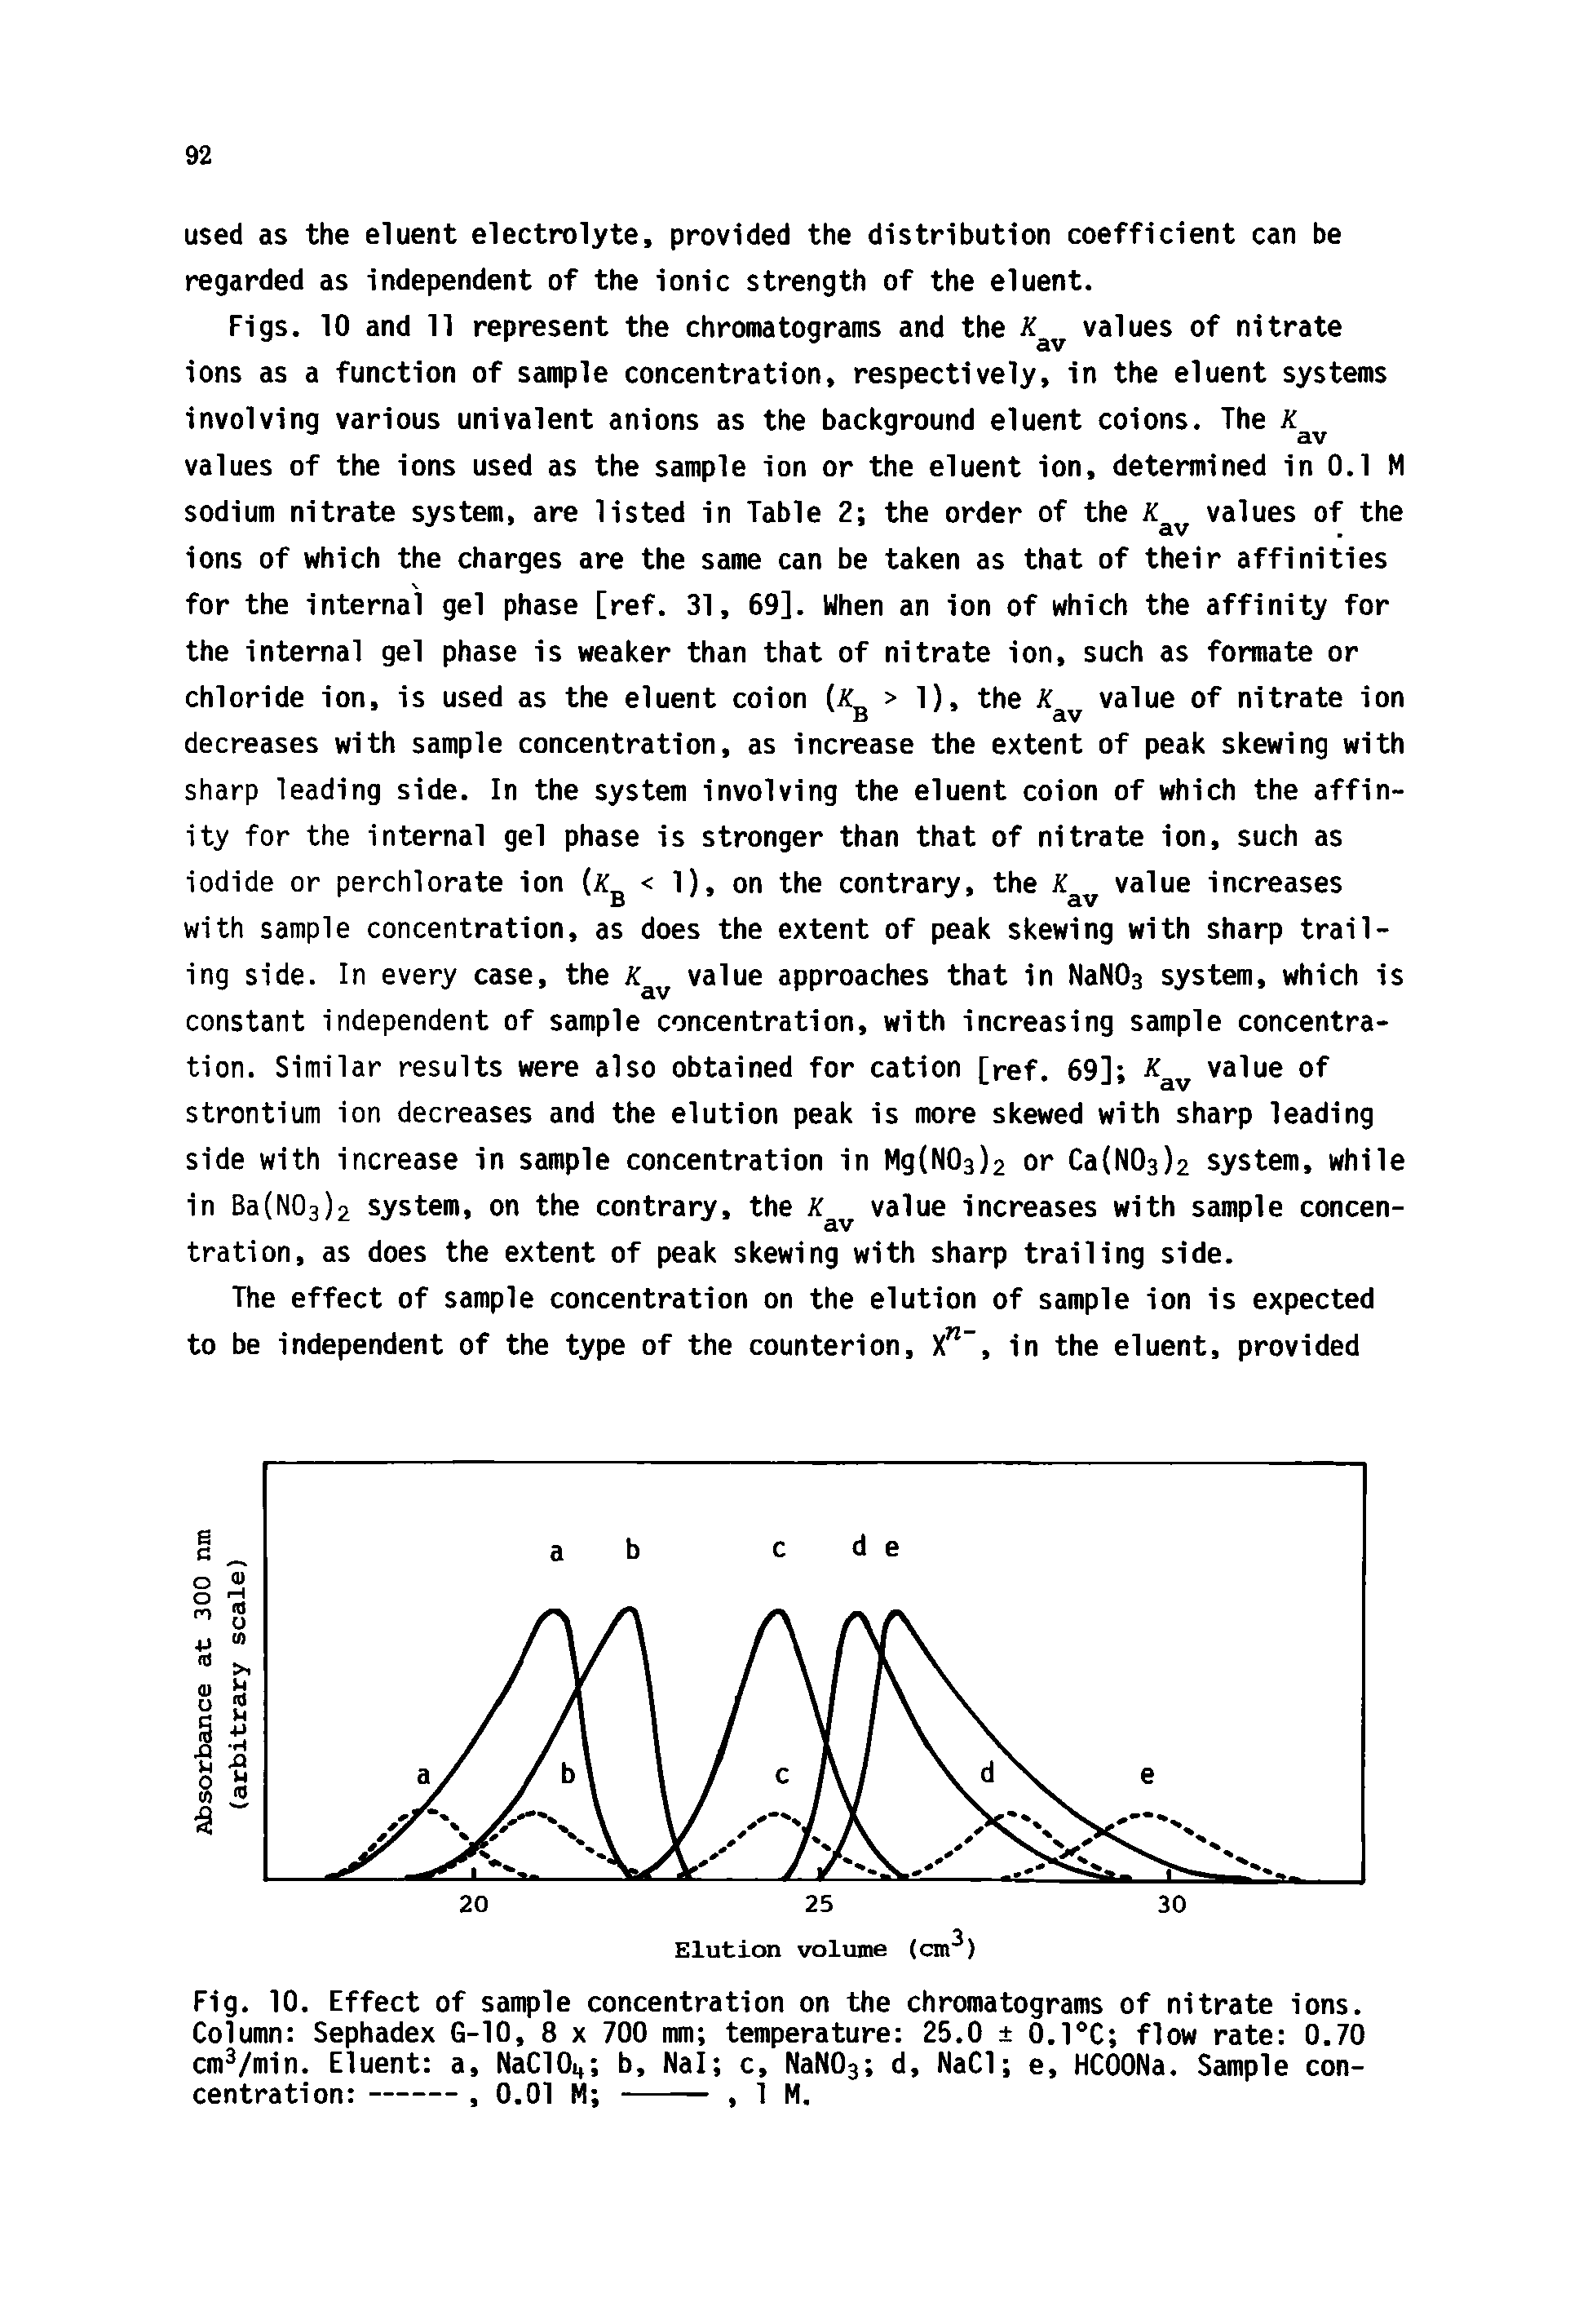 Fig. 10. Effect of sample concentration on the chromatograms of nitrate ions. Column Sephadex G-10, 8 x 700 mm temperature 25.0 0.1 C flow rate 0.70 cm /min. Eluent a, NaC10 b, Nal c, NaNOs d, NaCl e, HCOONa. Sample concentration ------, 0.01 M ------, 1 M.